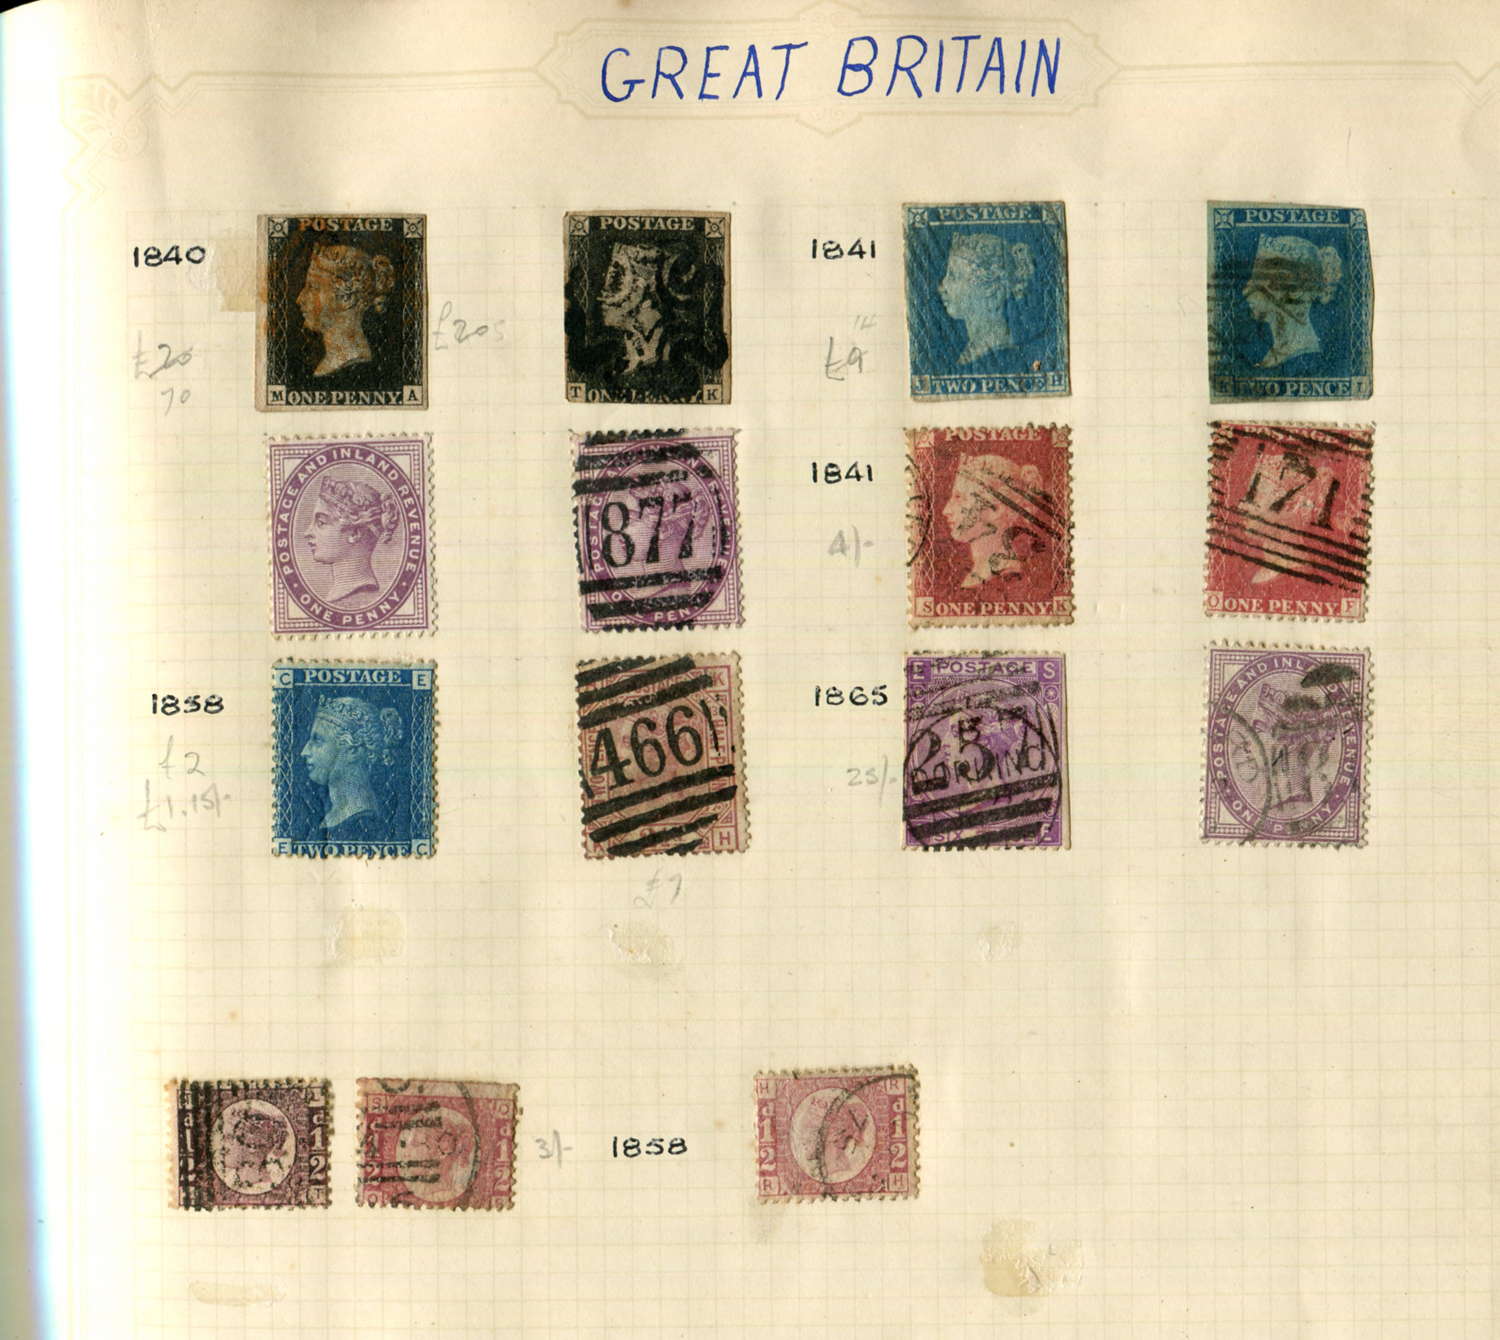 Two albums of Great Britain and British Commonwealth stamps, including two 1840 1d black used, 1d